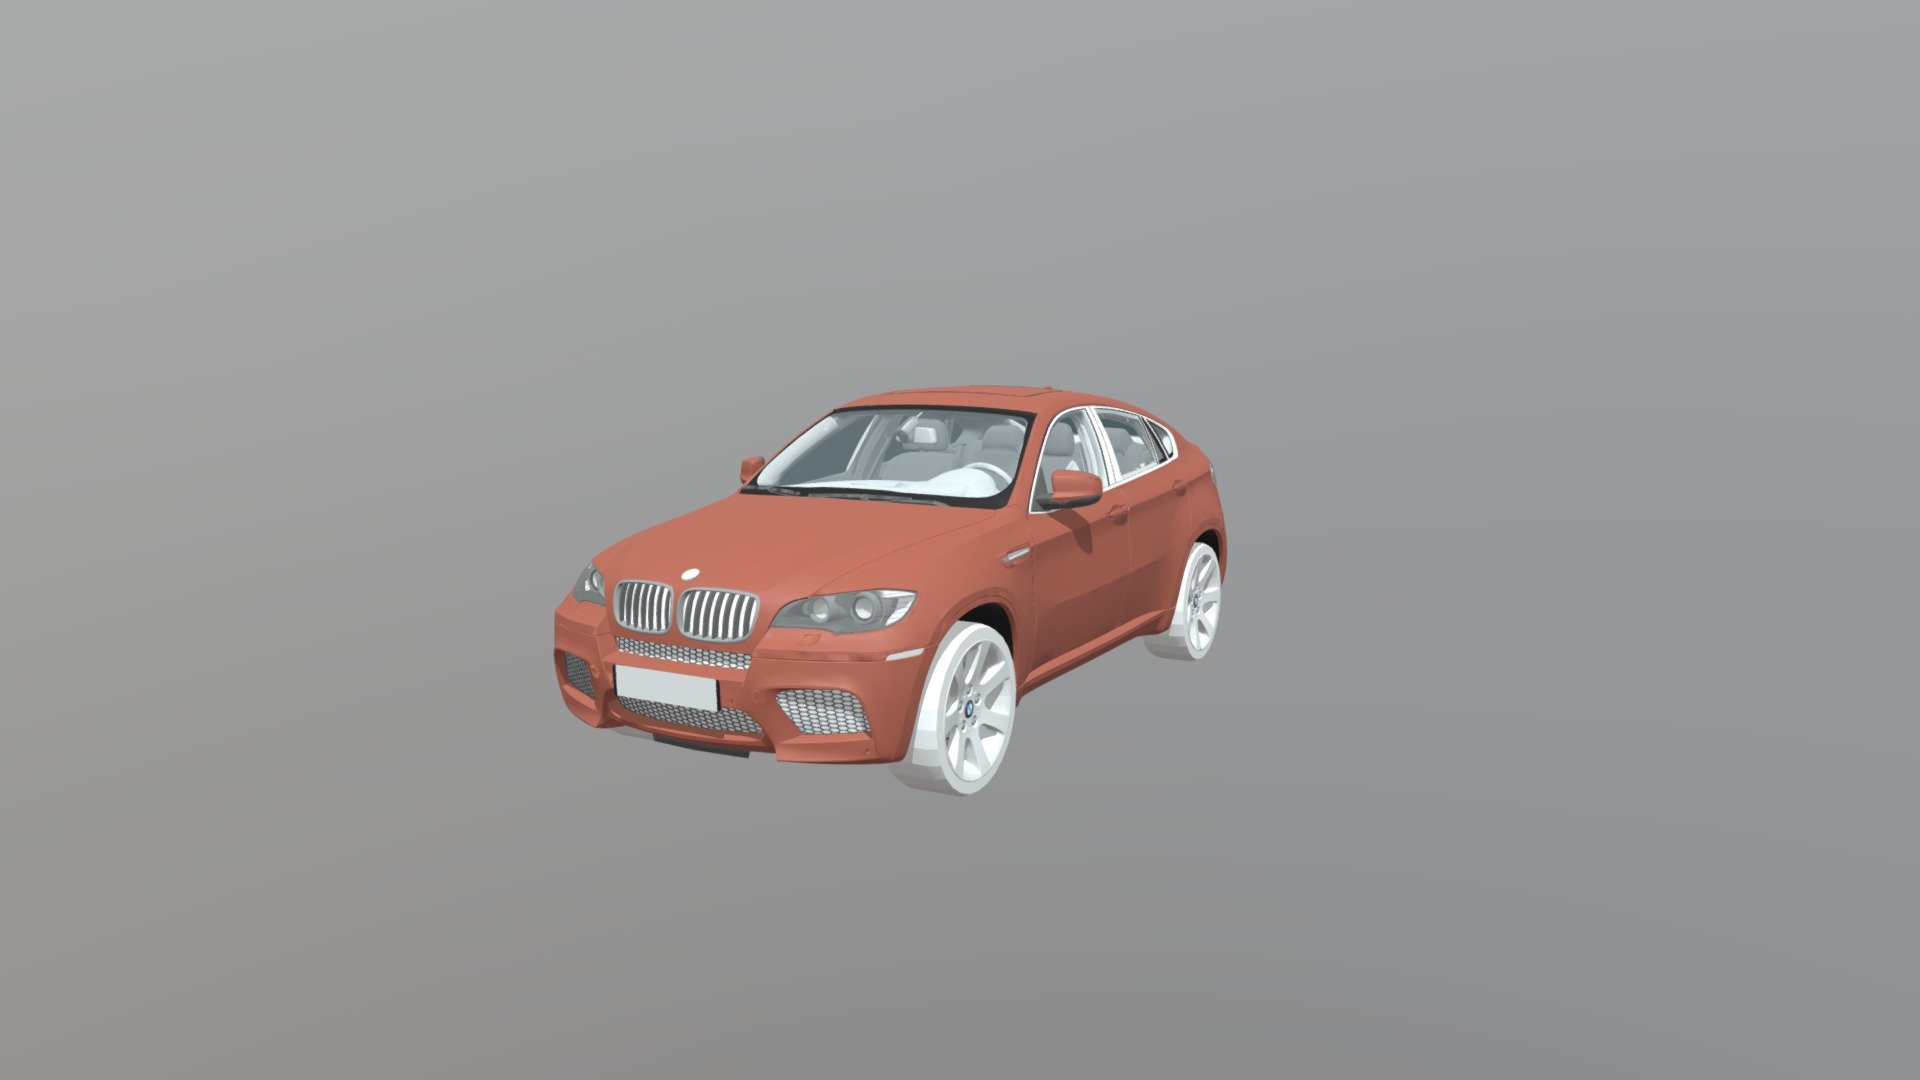 BMW X6 3d model

Highly detailed BMW X6 3d model. comes with detailed interior and pivot points set for open/close doors.

X6 is a midsize luxury crossover released in 2008 by German automaker BMW 3d model